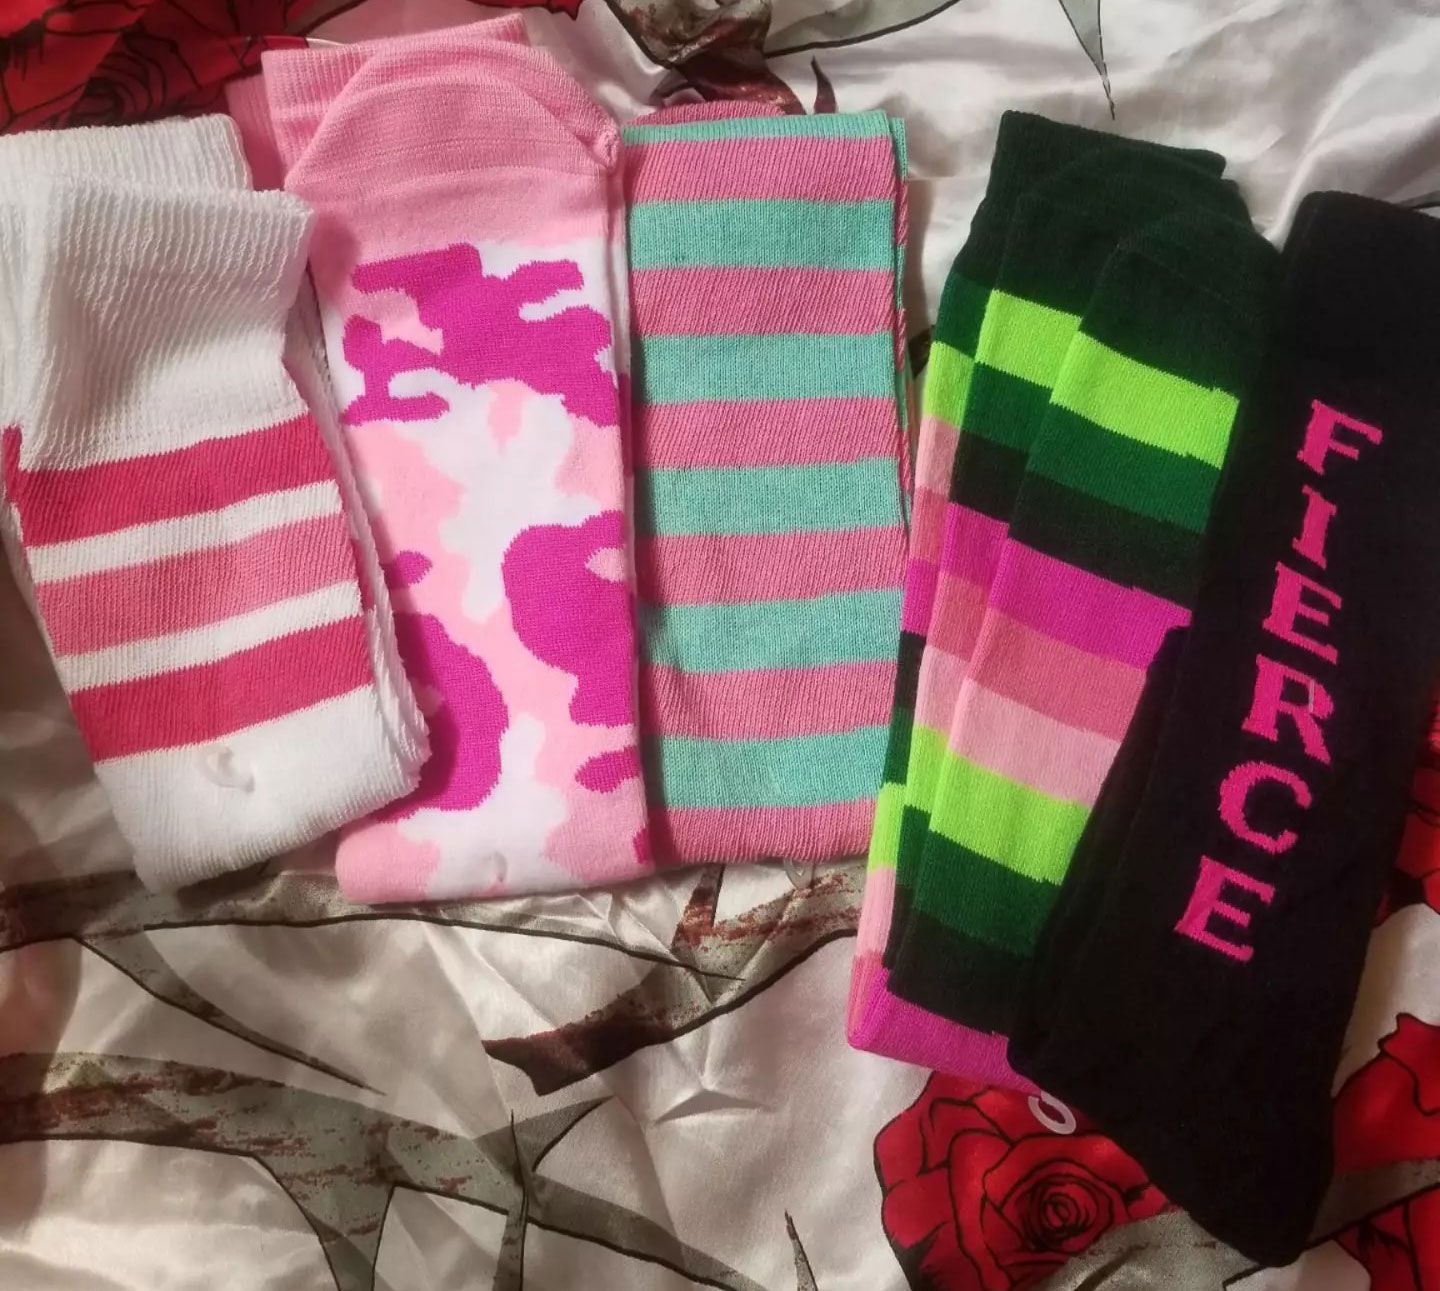 pink thigh highs, army camo, striped socks and wordy